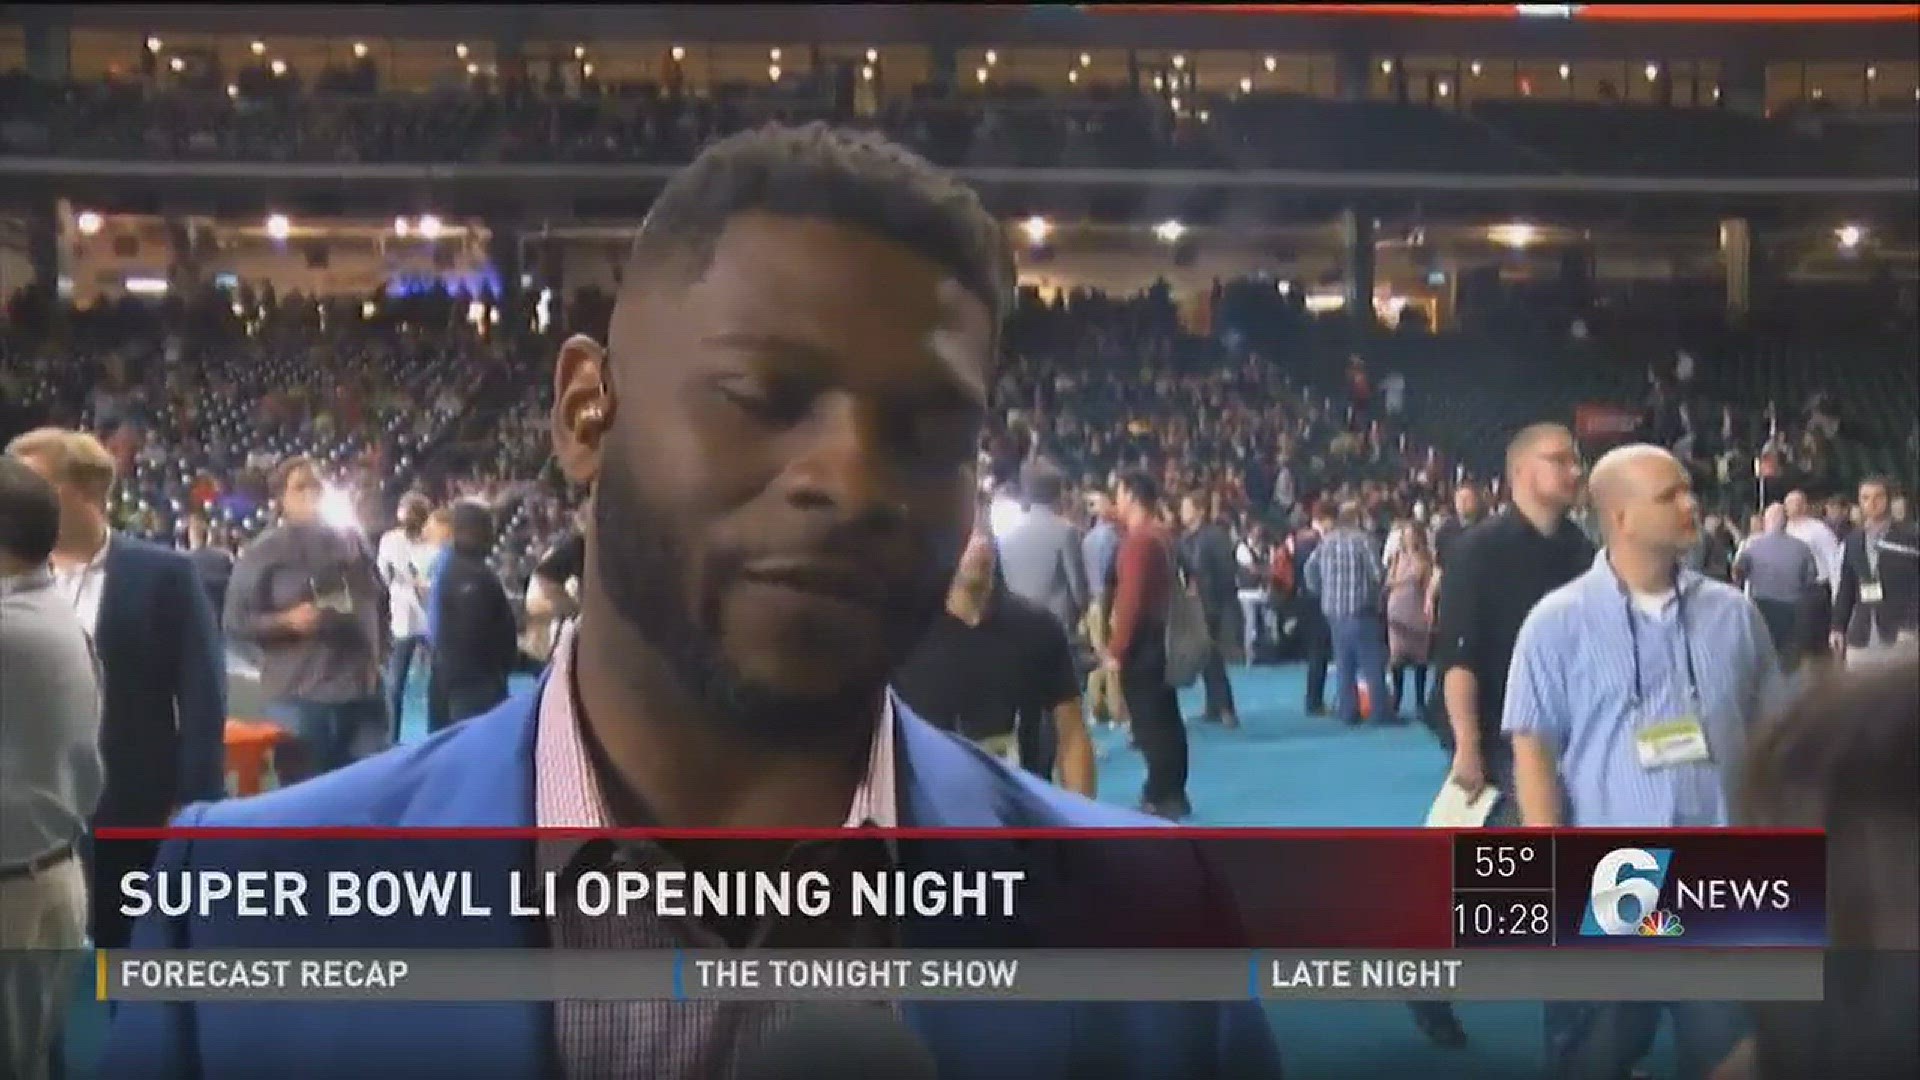 Nick Canizales and Jessica Morrey report from opening night at Super Bowl LI  with an interview with Waco native Ladanian Tomlinson.